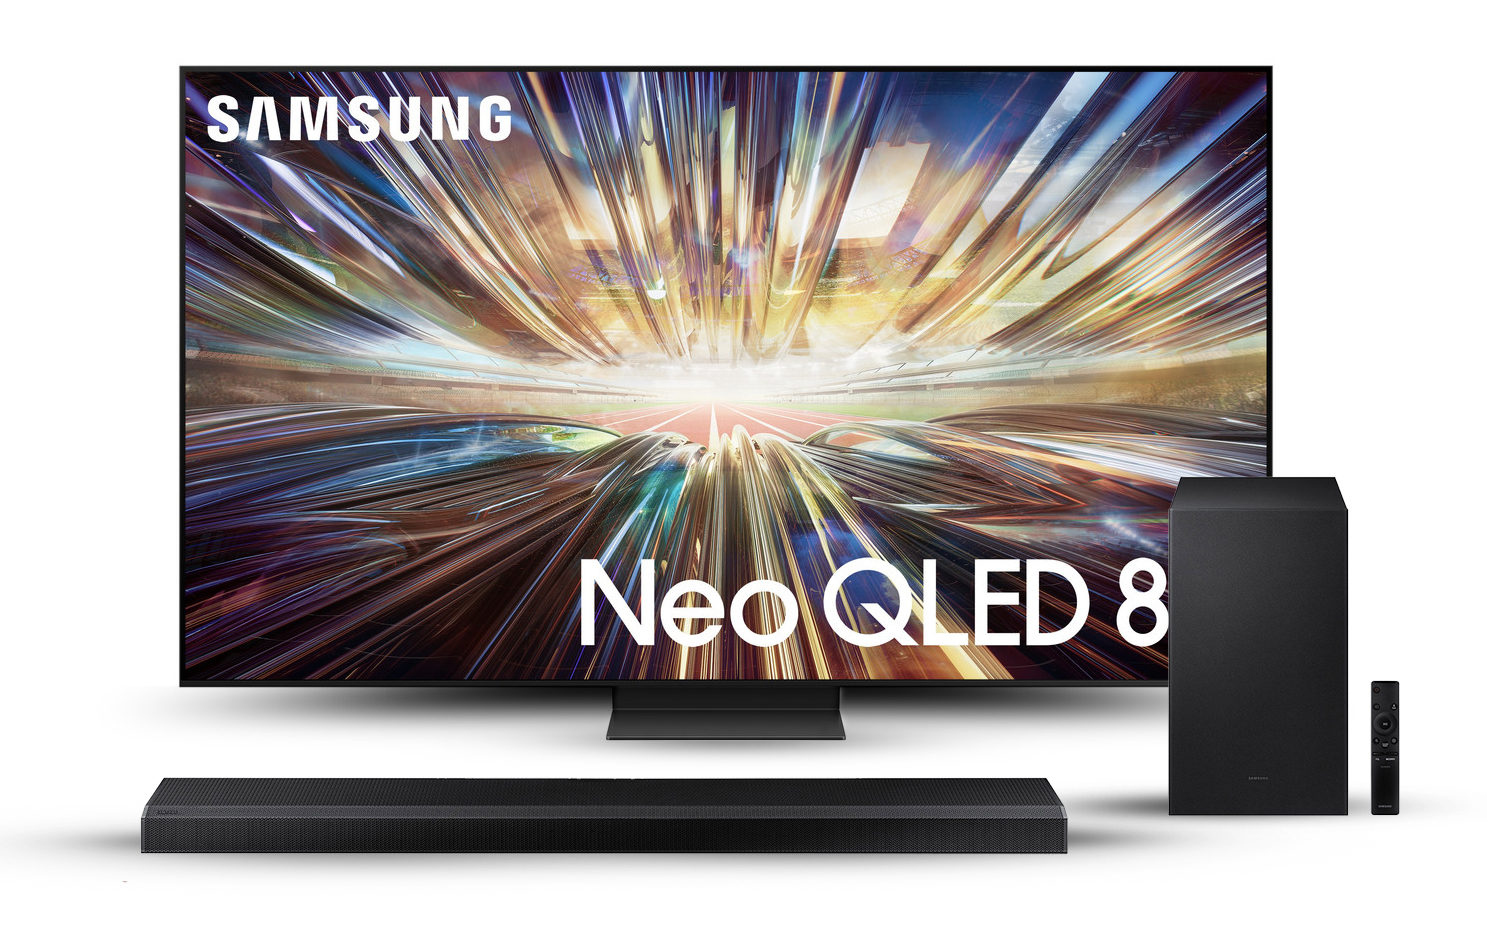 Samsung 65 Inch 8K UHD Smart Neo QLED TV with Built-in Receiver - 65QN800D, with 3.1.2 Channel Sound Bar- HW-Q700A with Shahid and Watchit 6 Months